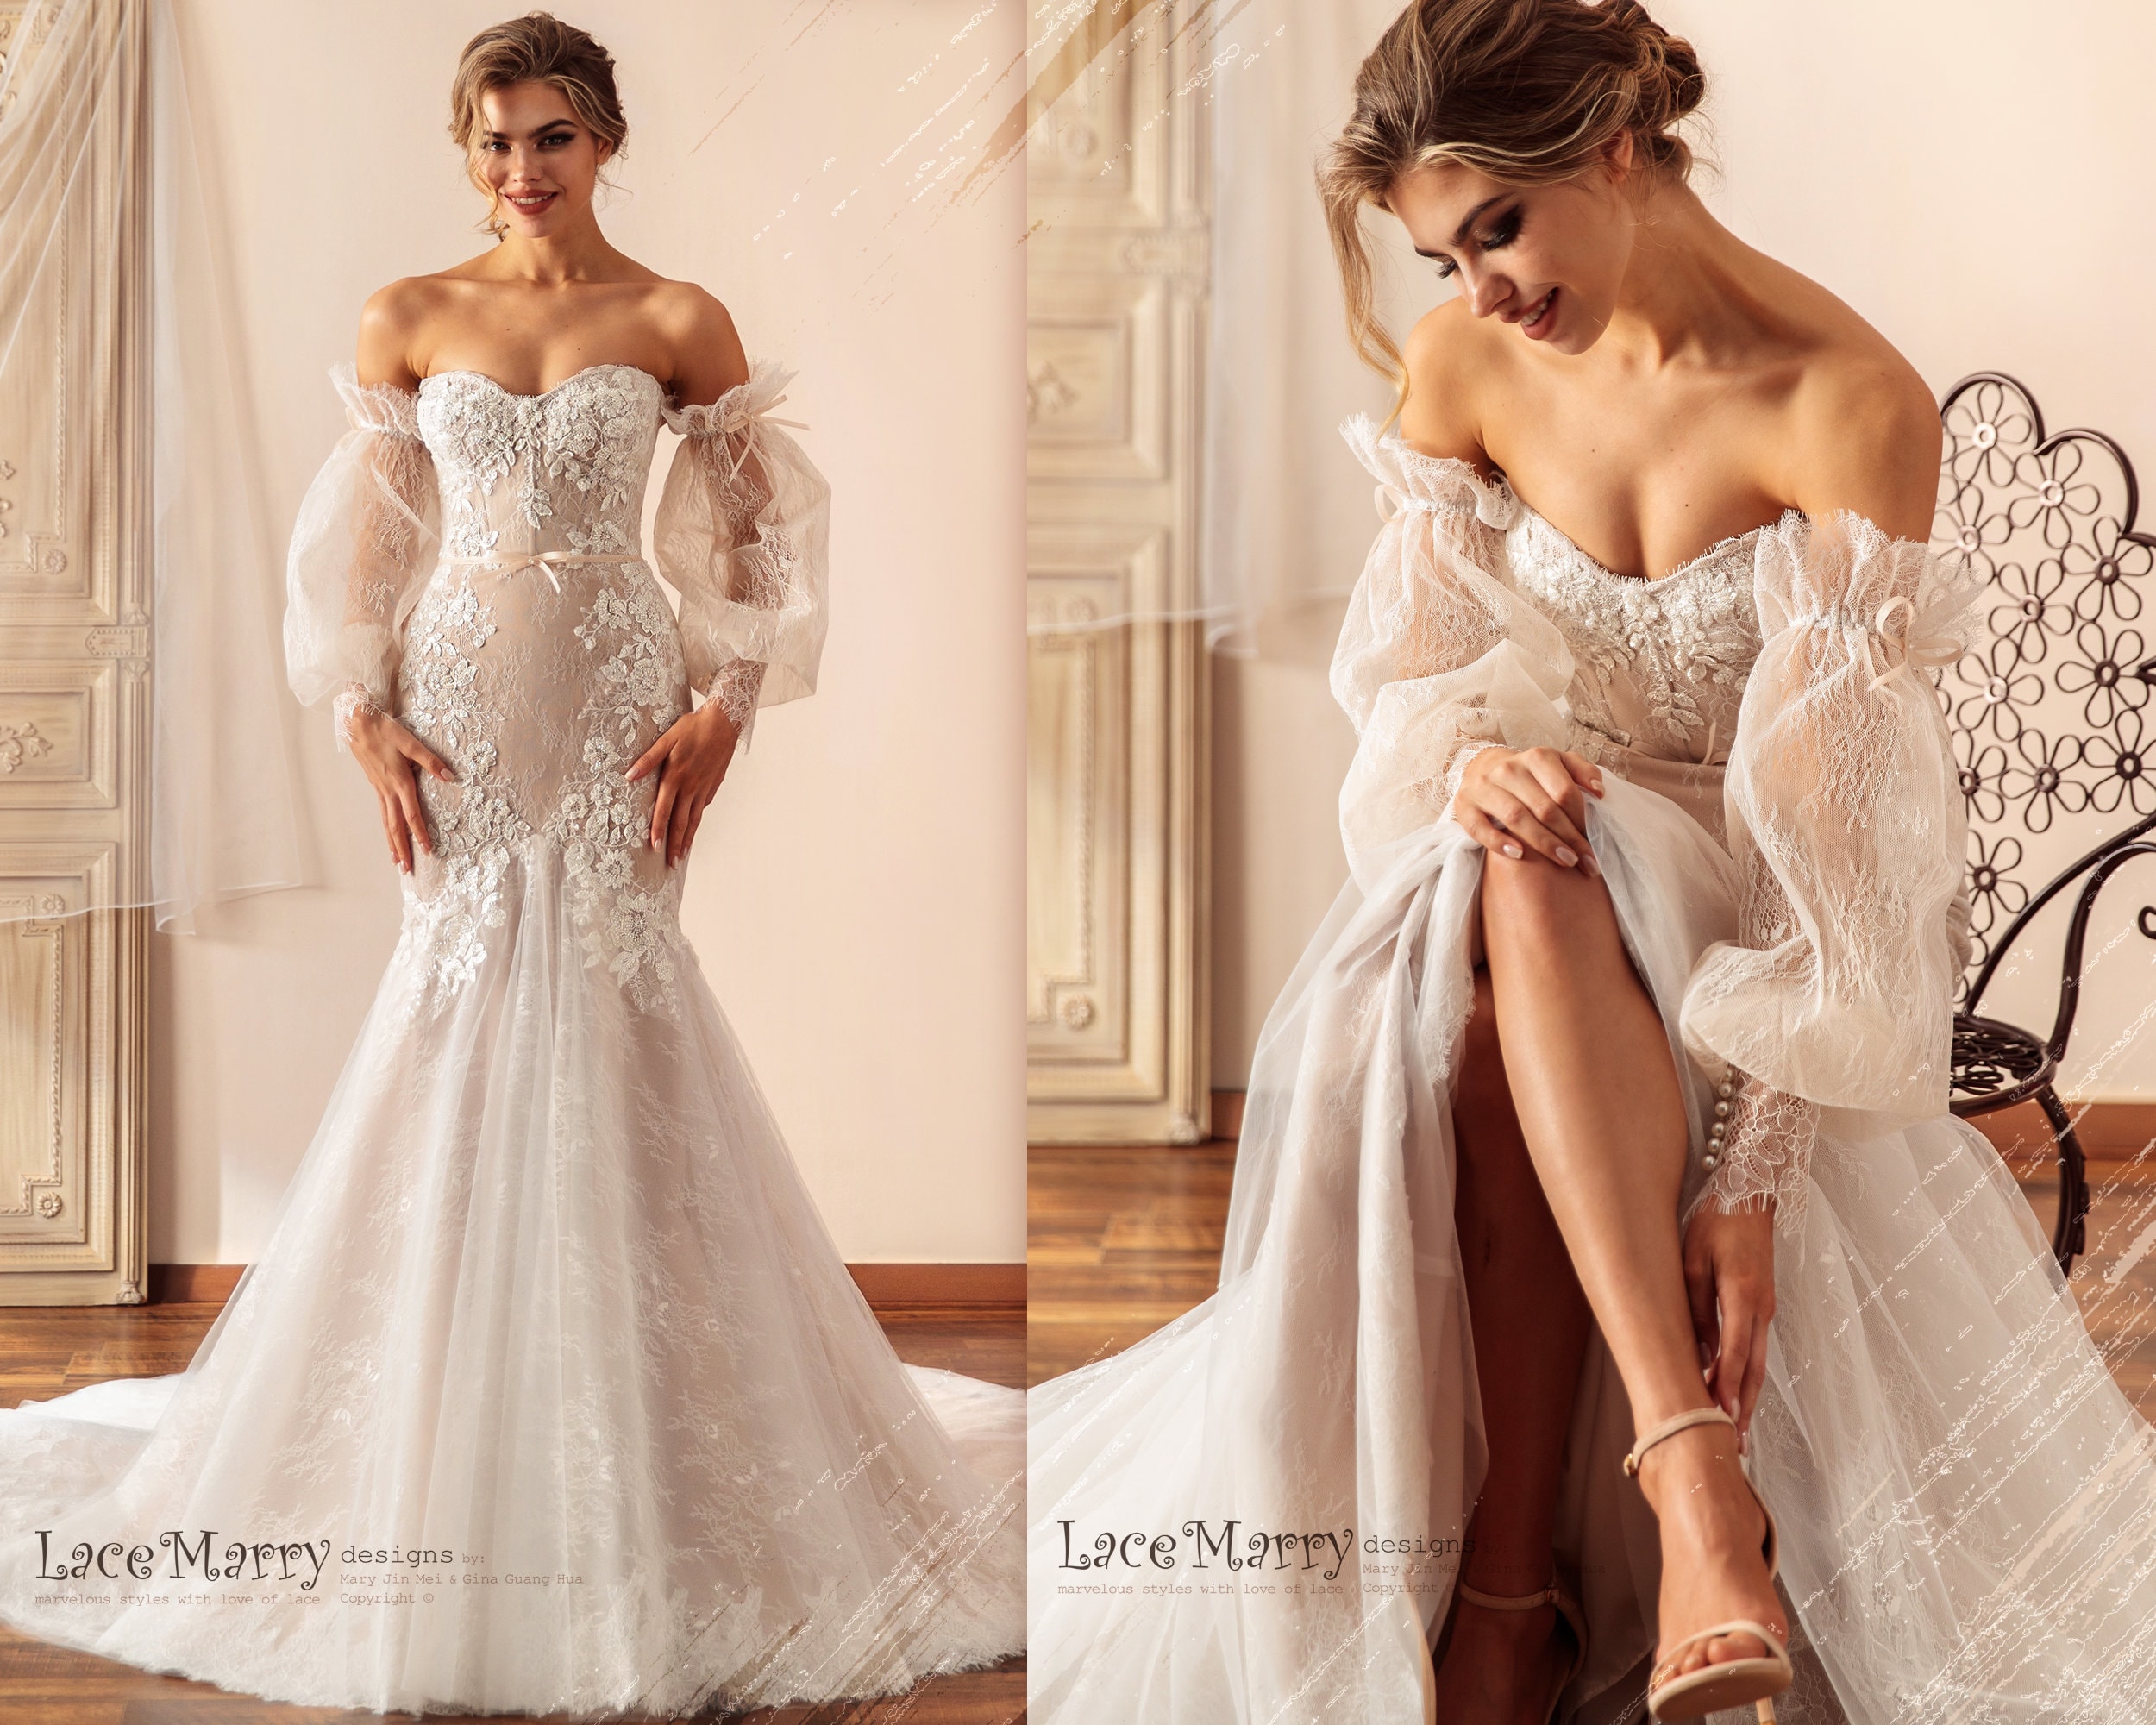 Lux Wedding Dress with Off Shoulder Straps - LaceMarry